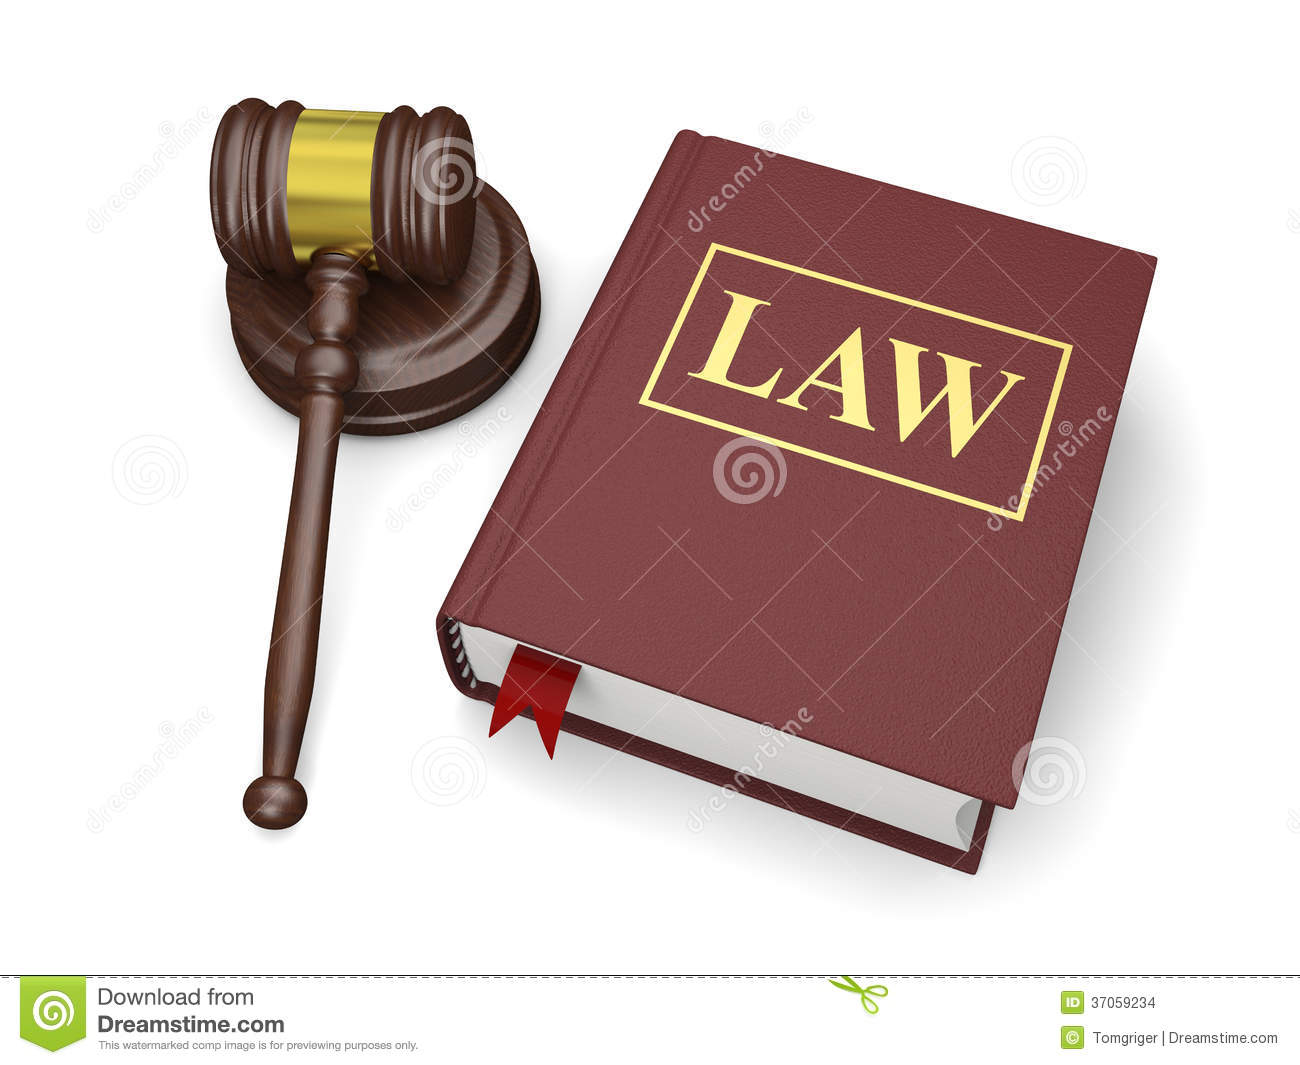     And Law Book Isolated On White Background Symbols Of Law And Justice